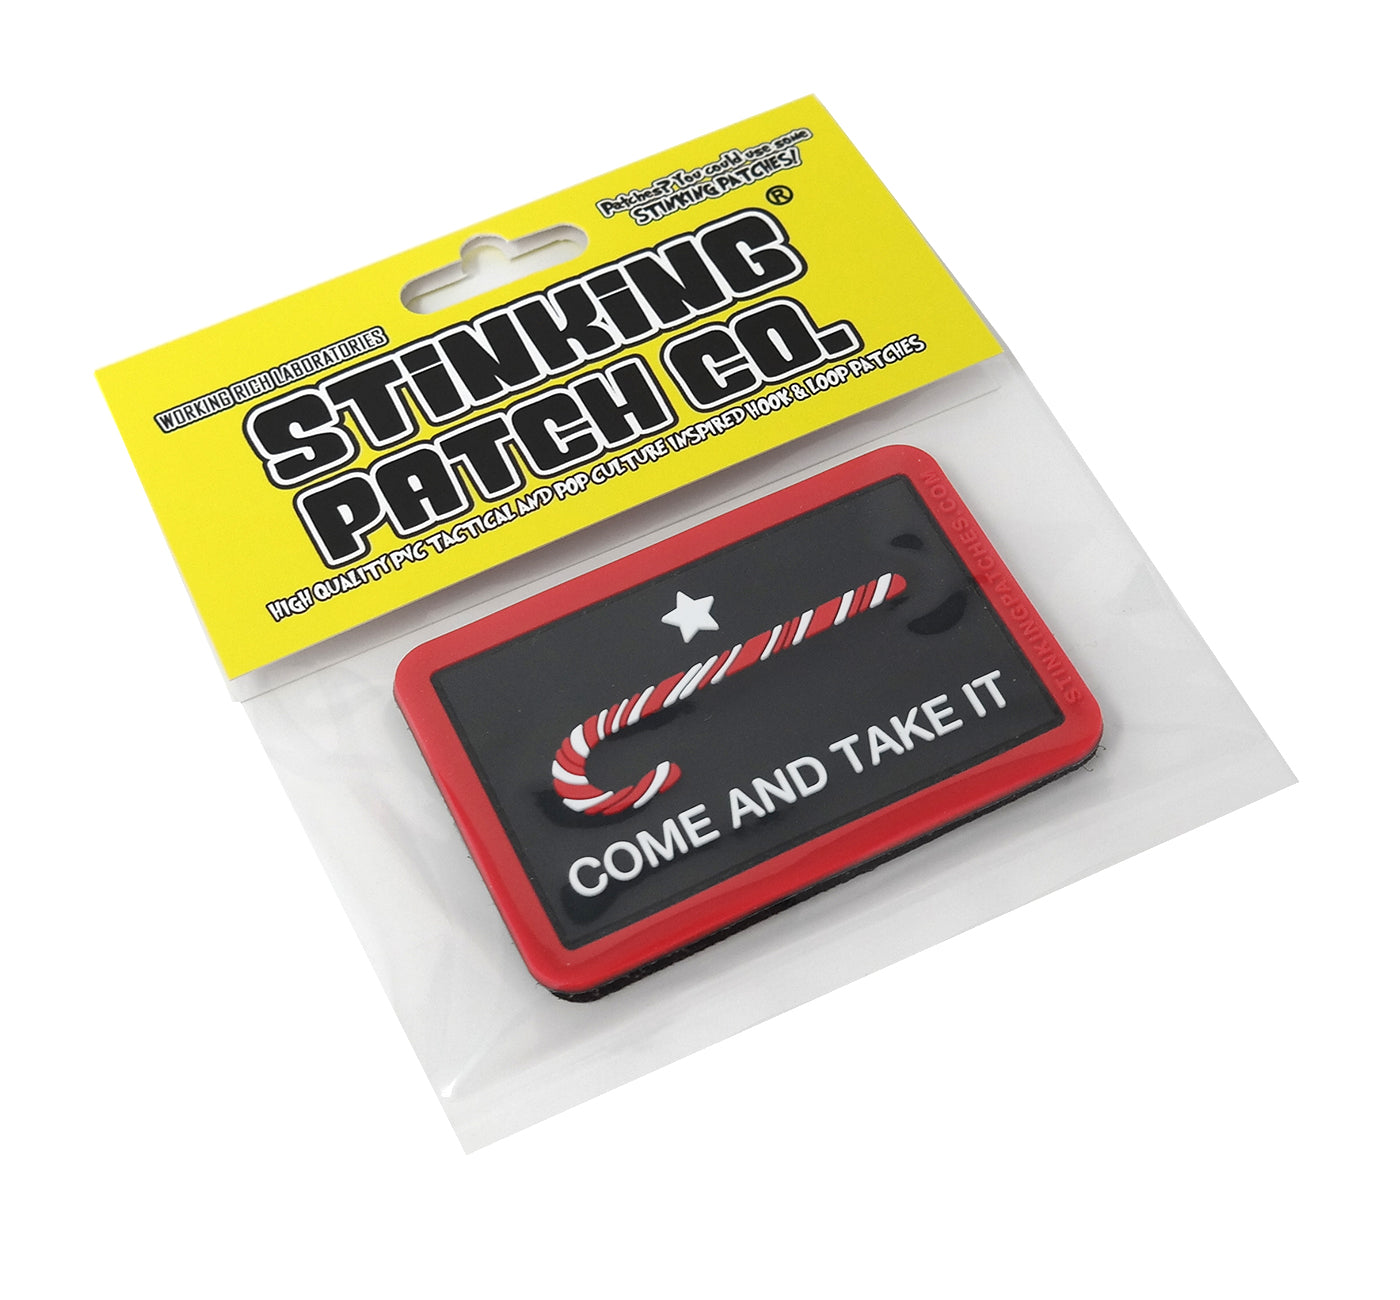 Stinking Patch Co. Now You Can Have It PVC Rubber Tactical Patch